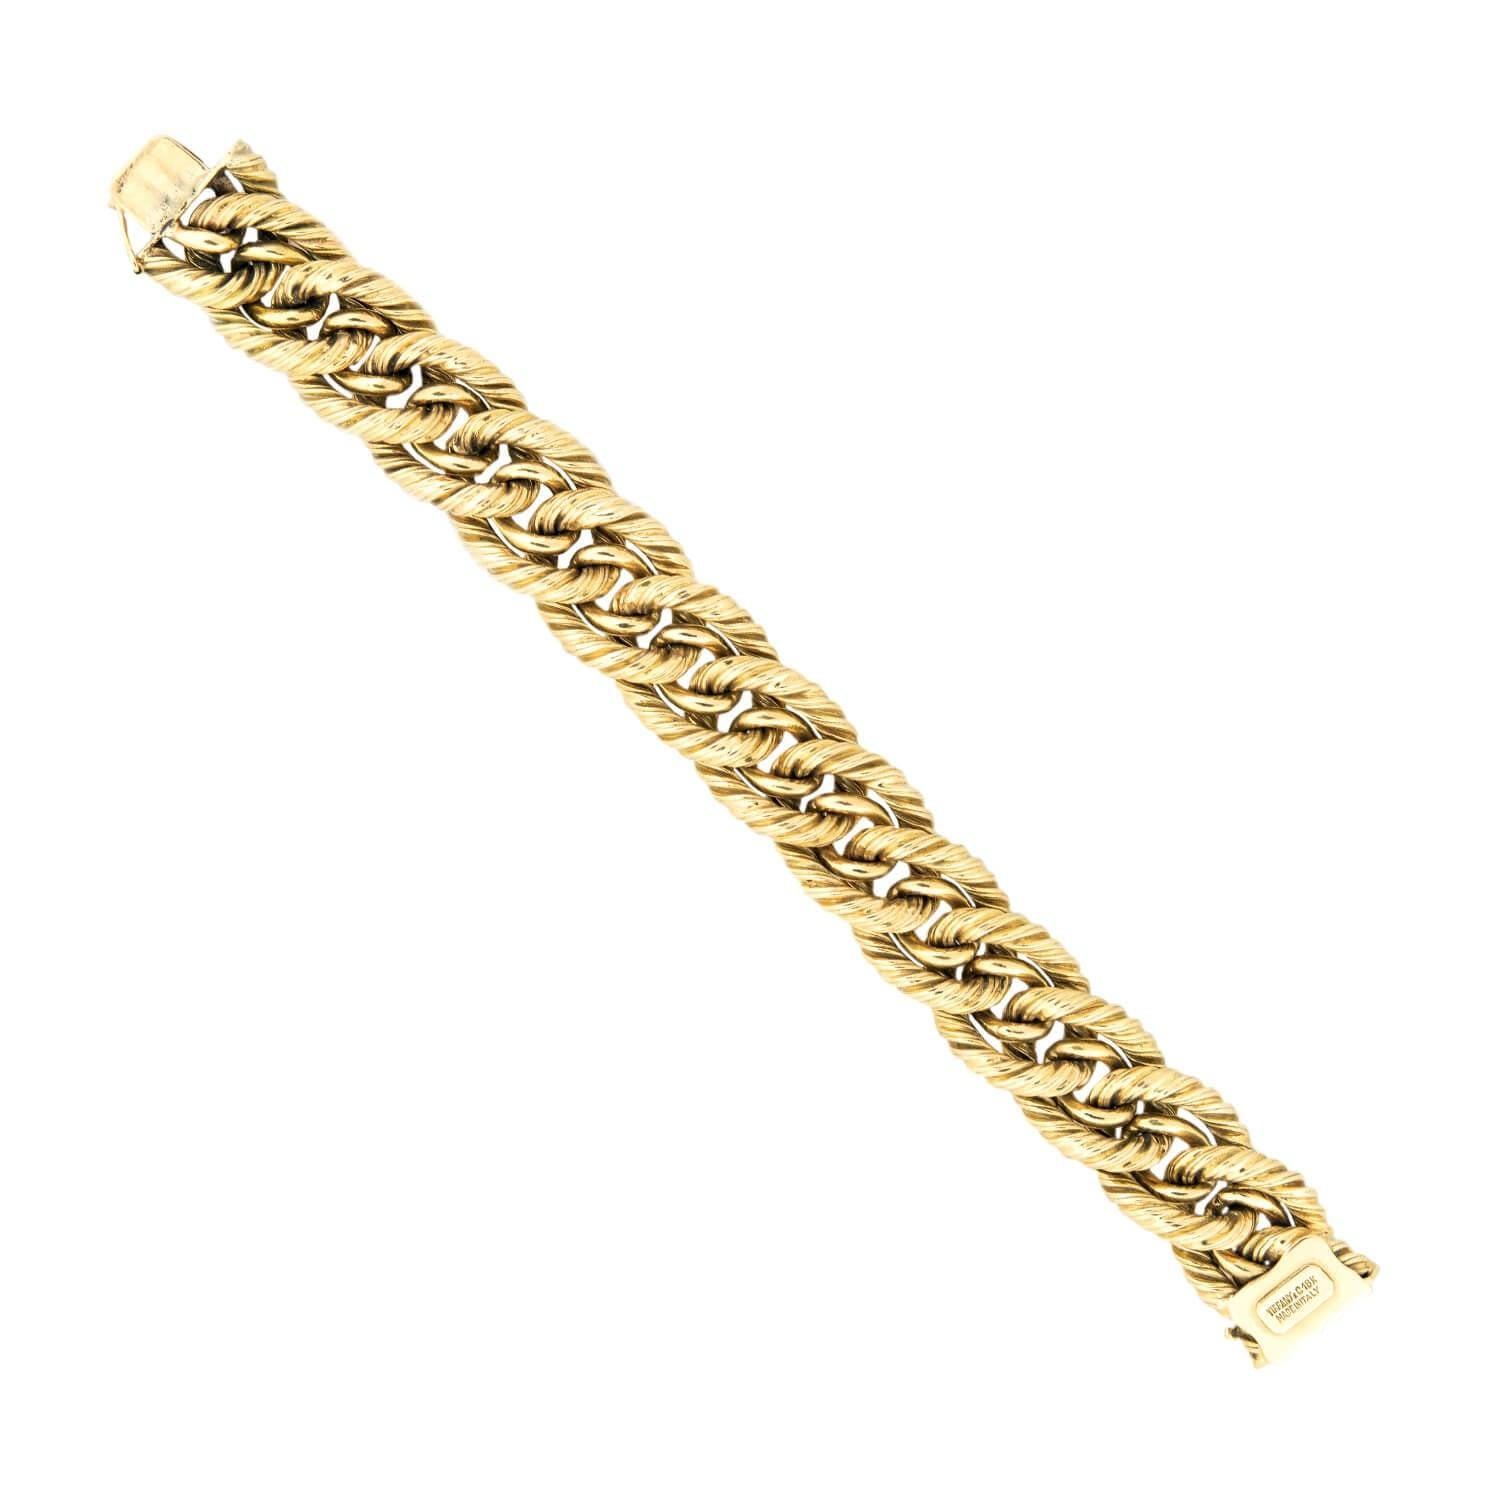 TIFFANY & CO. Vintage 18k Gold Twisted Curb Chain Bracelet 57.0dwt For Sale 2